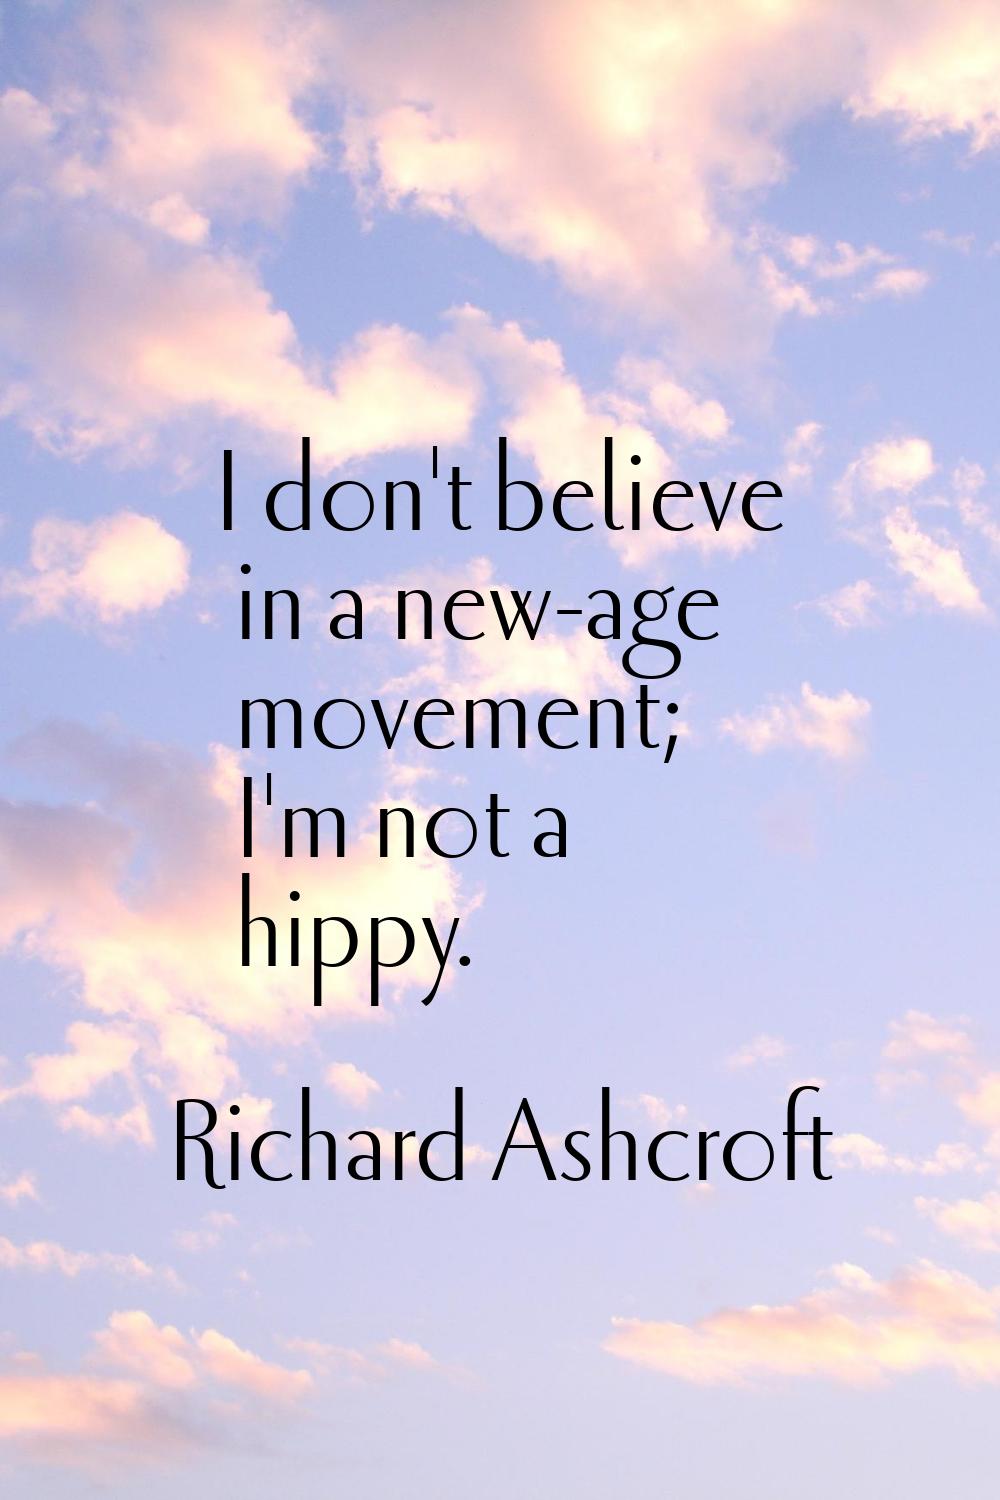 I don't believe in a new-age movement; I'm not a hippy.